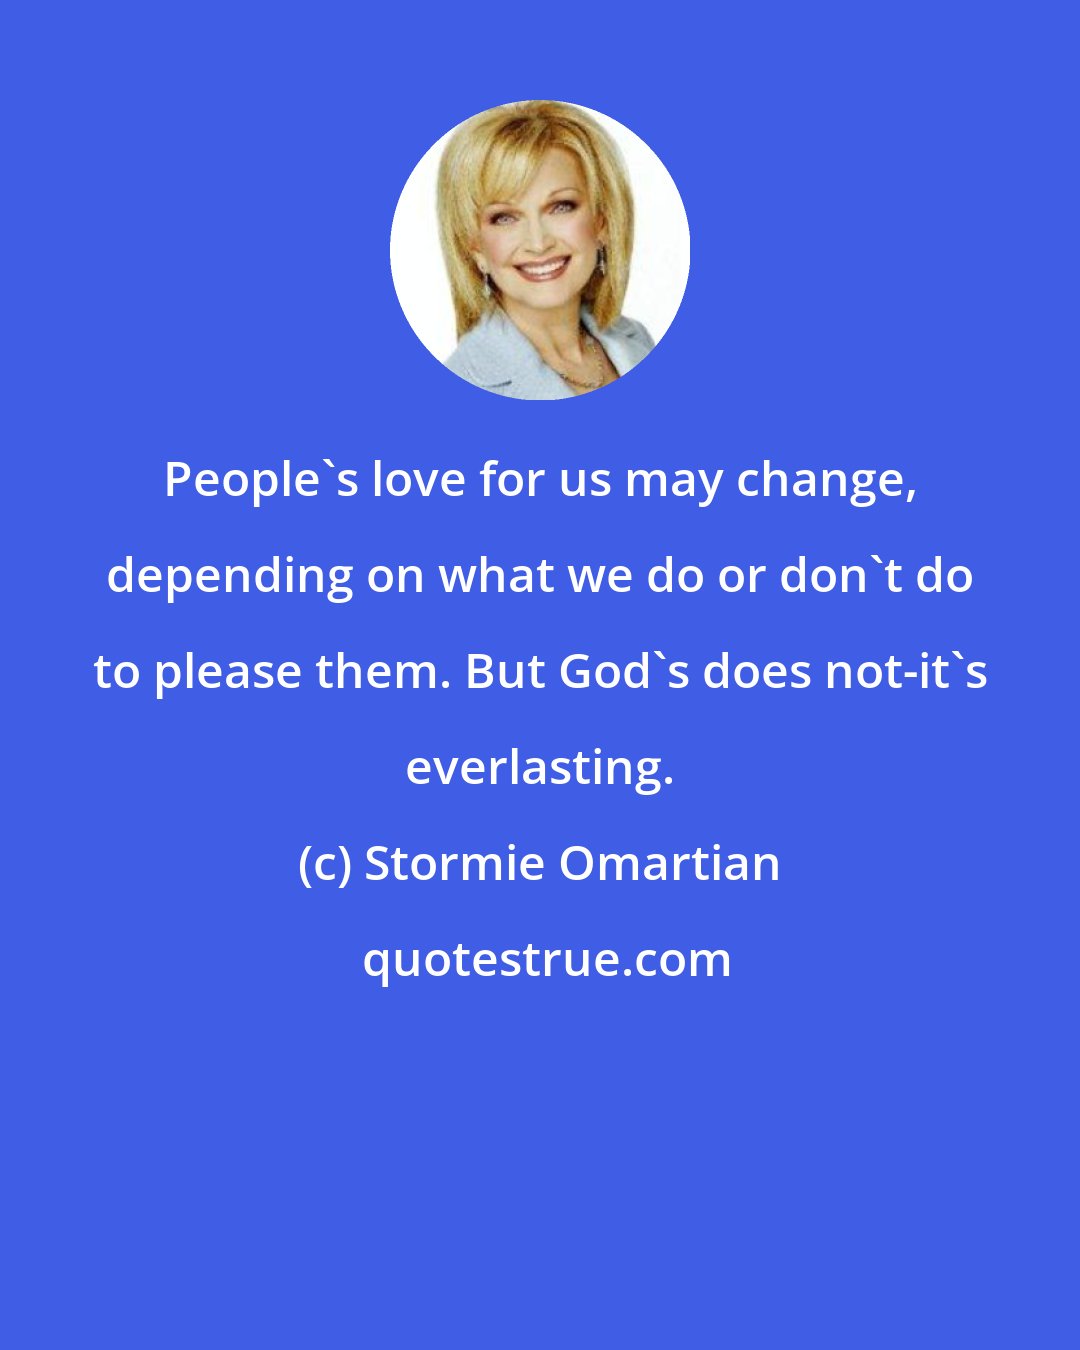 Stormie Omartian: People's love for us may change, depending on what we do or don't do to please them. But God's does not-it's everlasting.